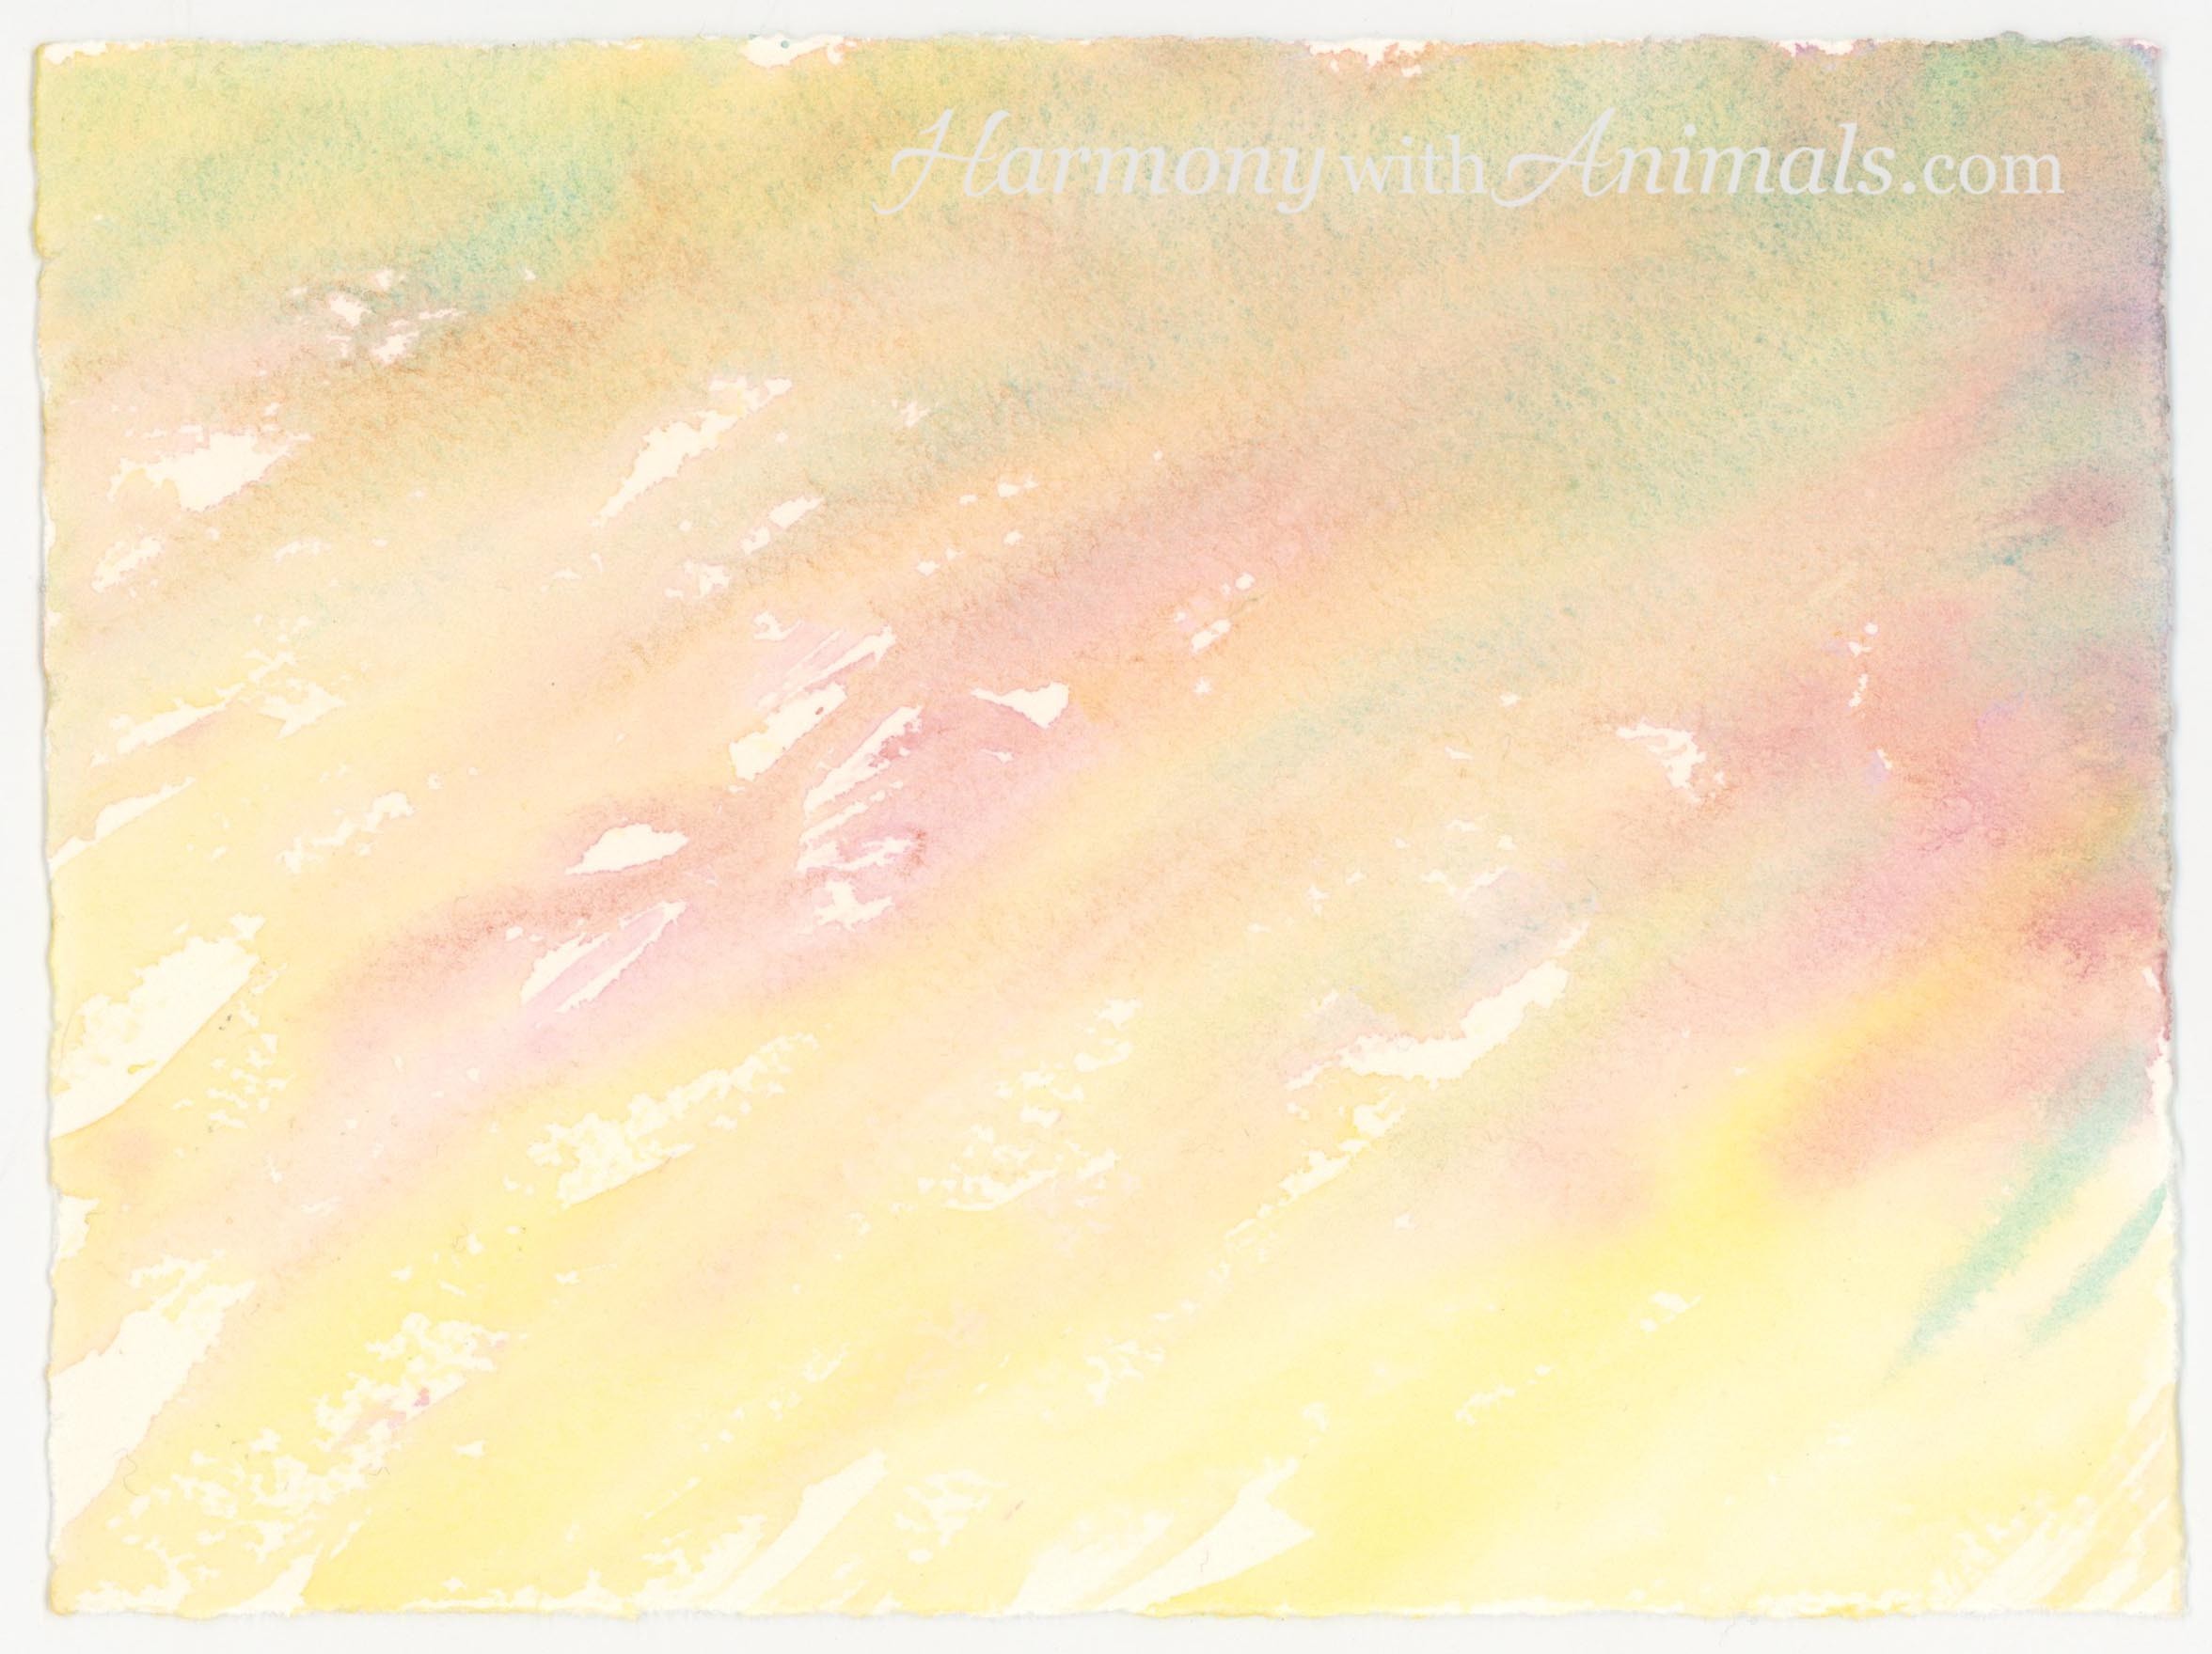 2352x1759 Mystery watercolor background: Could it become a cat, a dog, or.